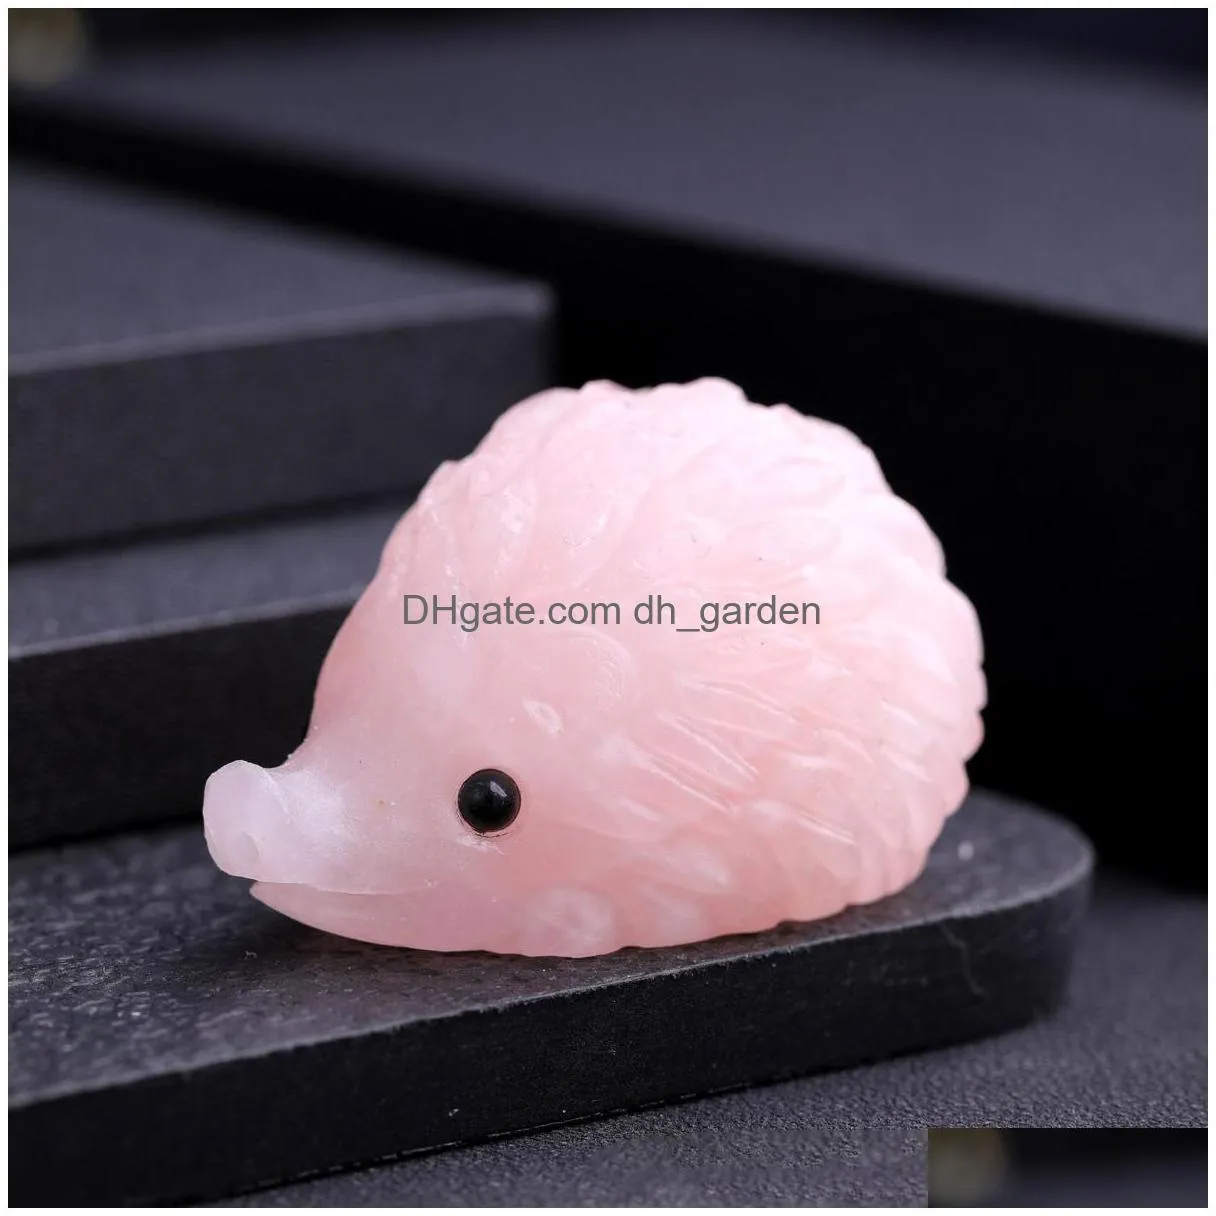 Stone Hedgehog Statue Natural Stone Fluorite Pink Quartz Crystal Healing Carved Stereoscopic Figurines Animal Crafts Home Dr Dhgarden Dh2On